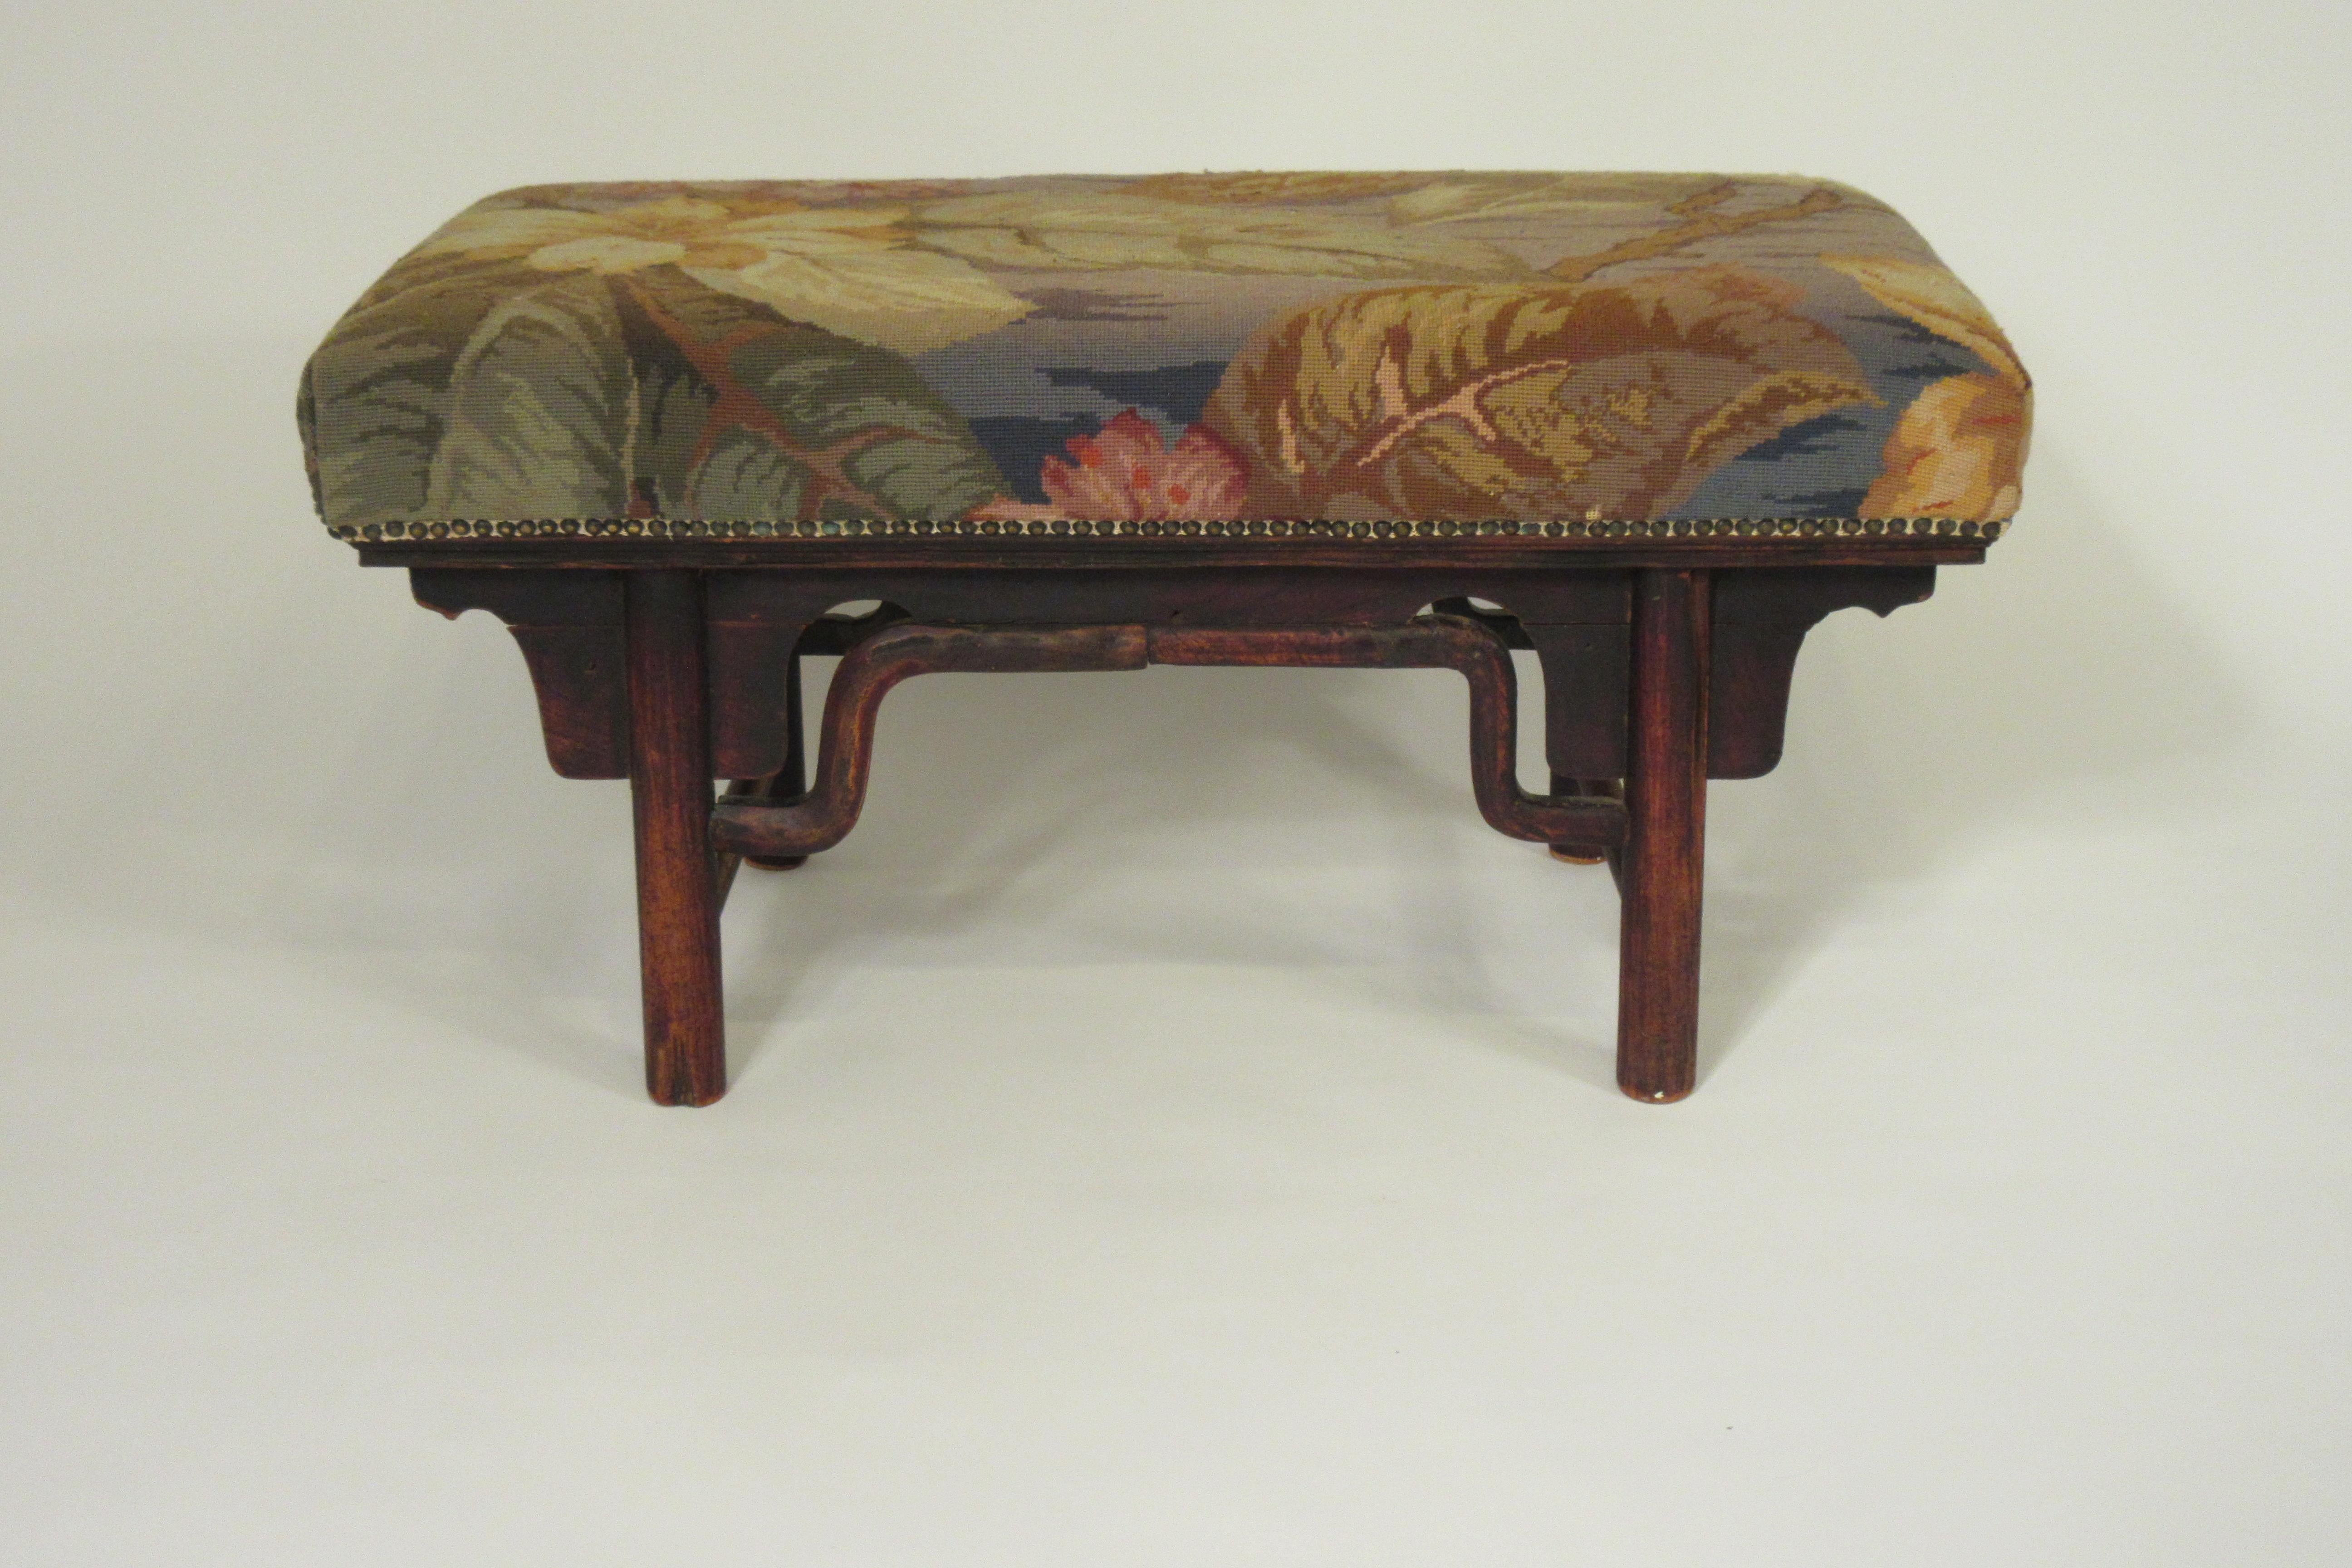 Turn of the century wood Asian bench. Original upholstery.